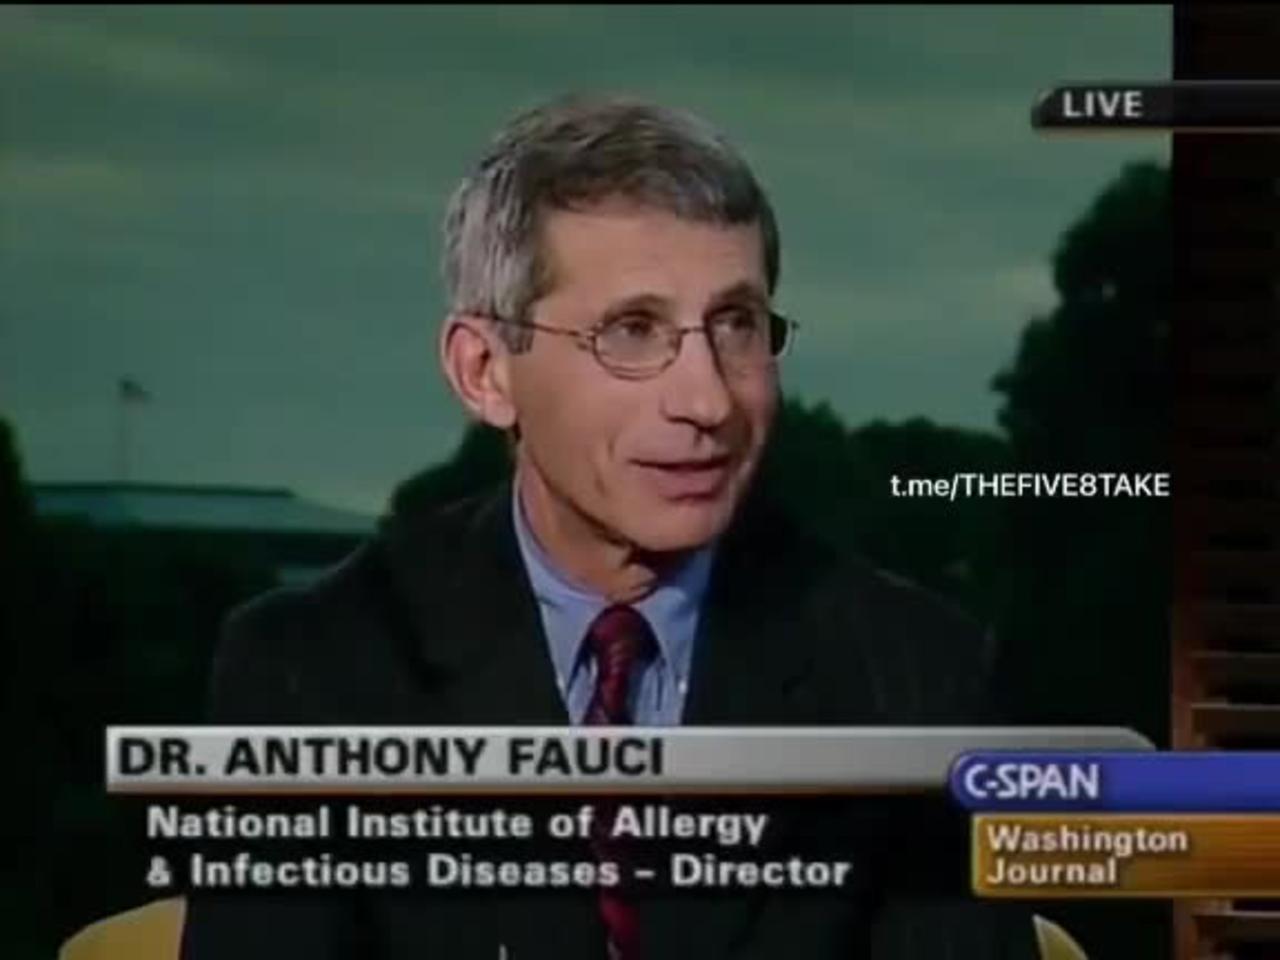 Fauci Flashback: "The Most Potent Vaccination is Getting Infected Yourself"